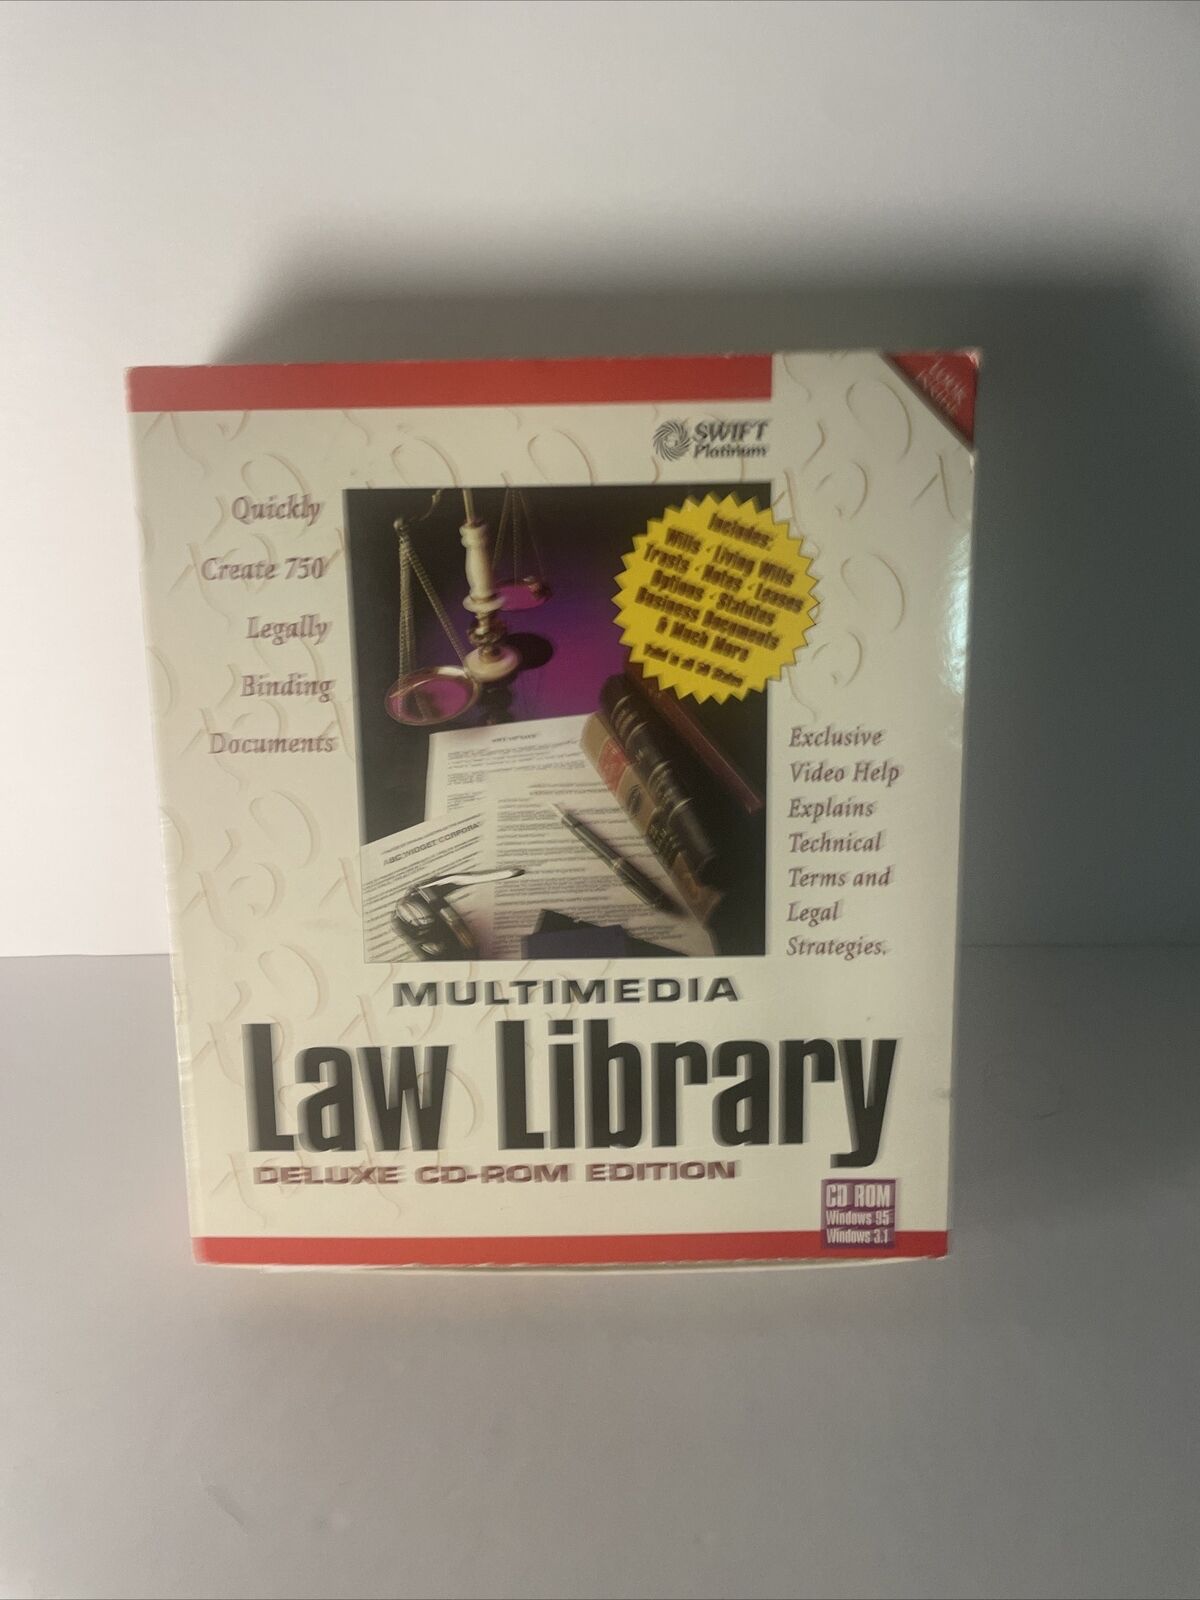 Vintage Computer Multimedia Law Library Deluxe CD-ROM Edition 